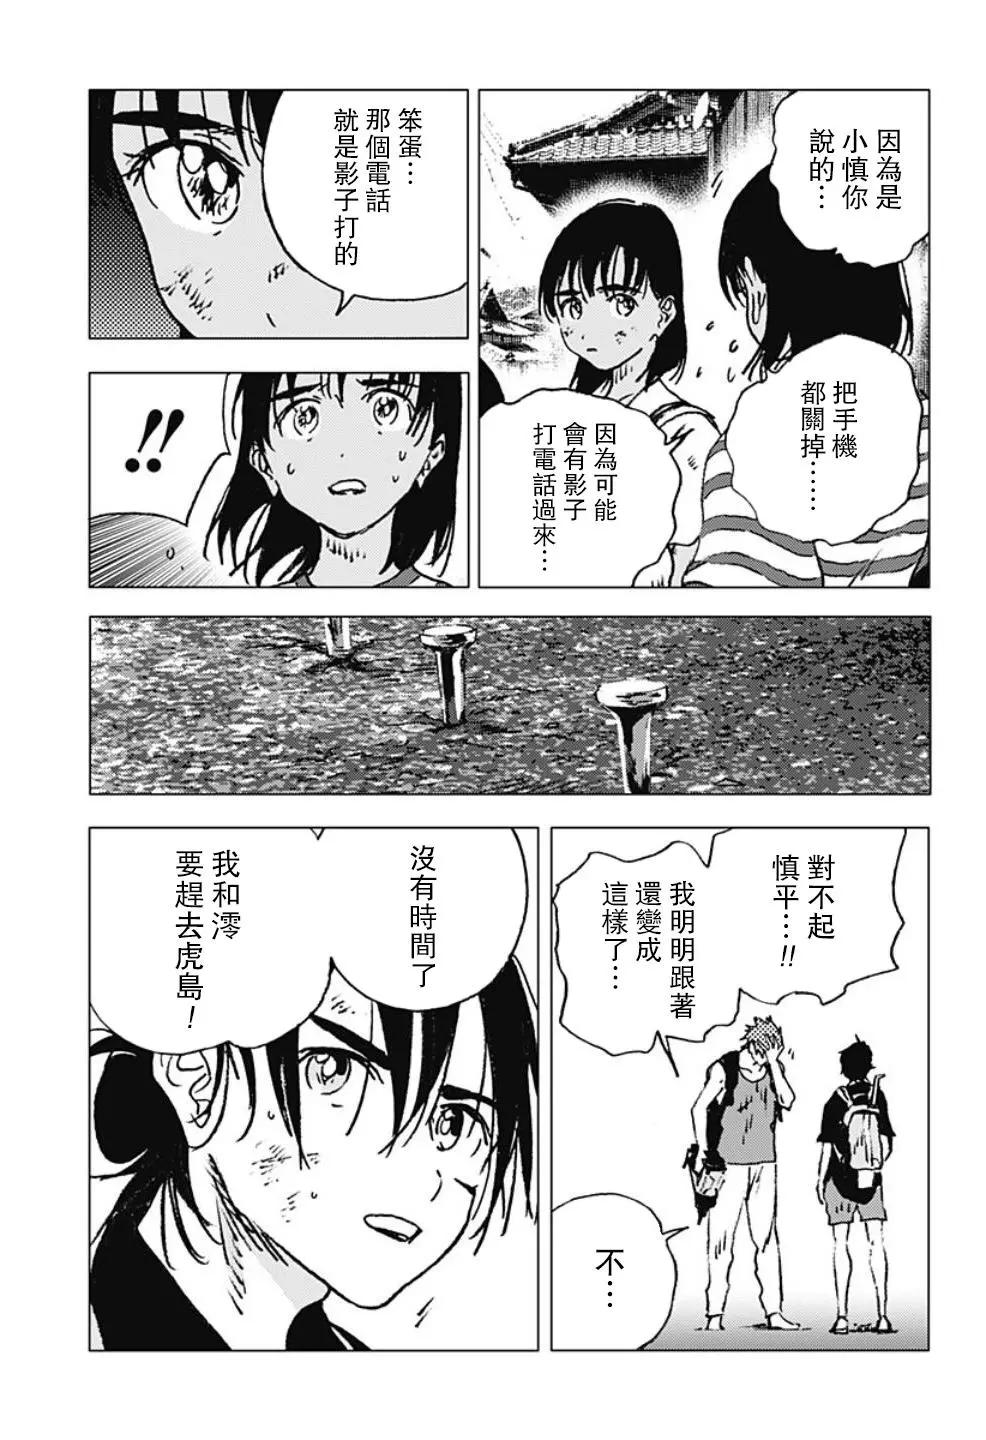 Summer time rendering - 第111話 - 3